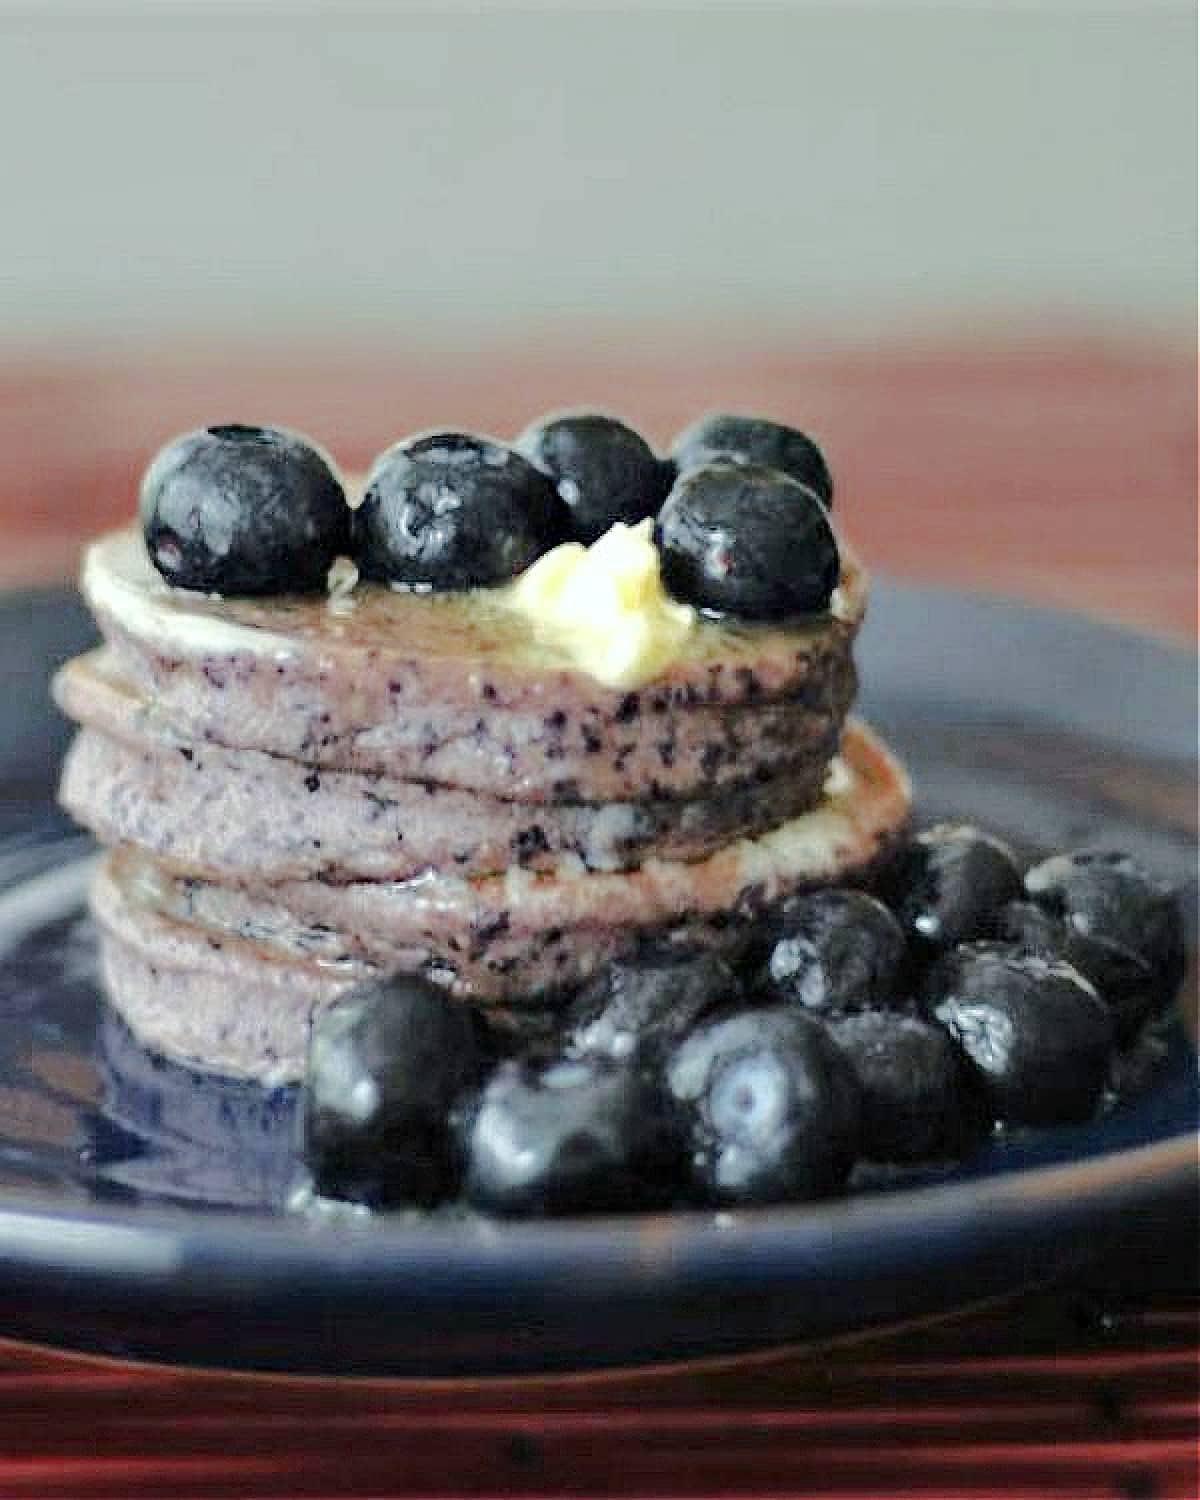 A stack of 4 pancakes that have fresh blueberries blended into the batter, so the pancakes are purple. Pancakes are on a dark blue plate and are garnished with melting butter, maple syrup, and plump juicy blueberries.